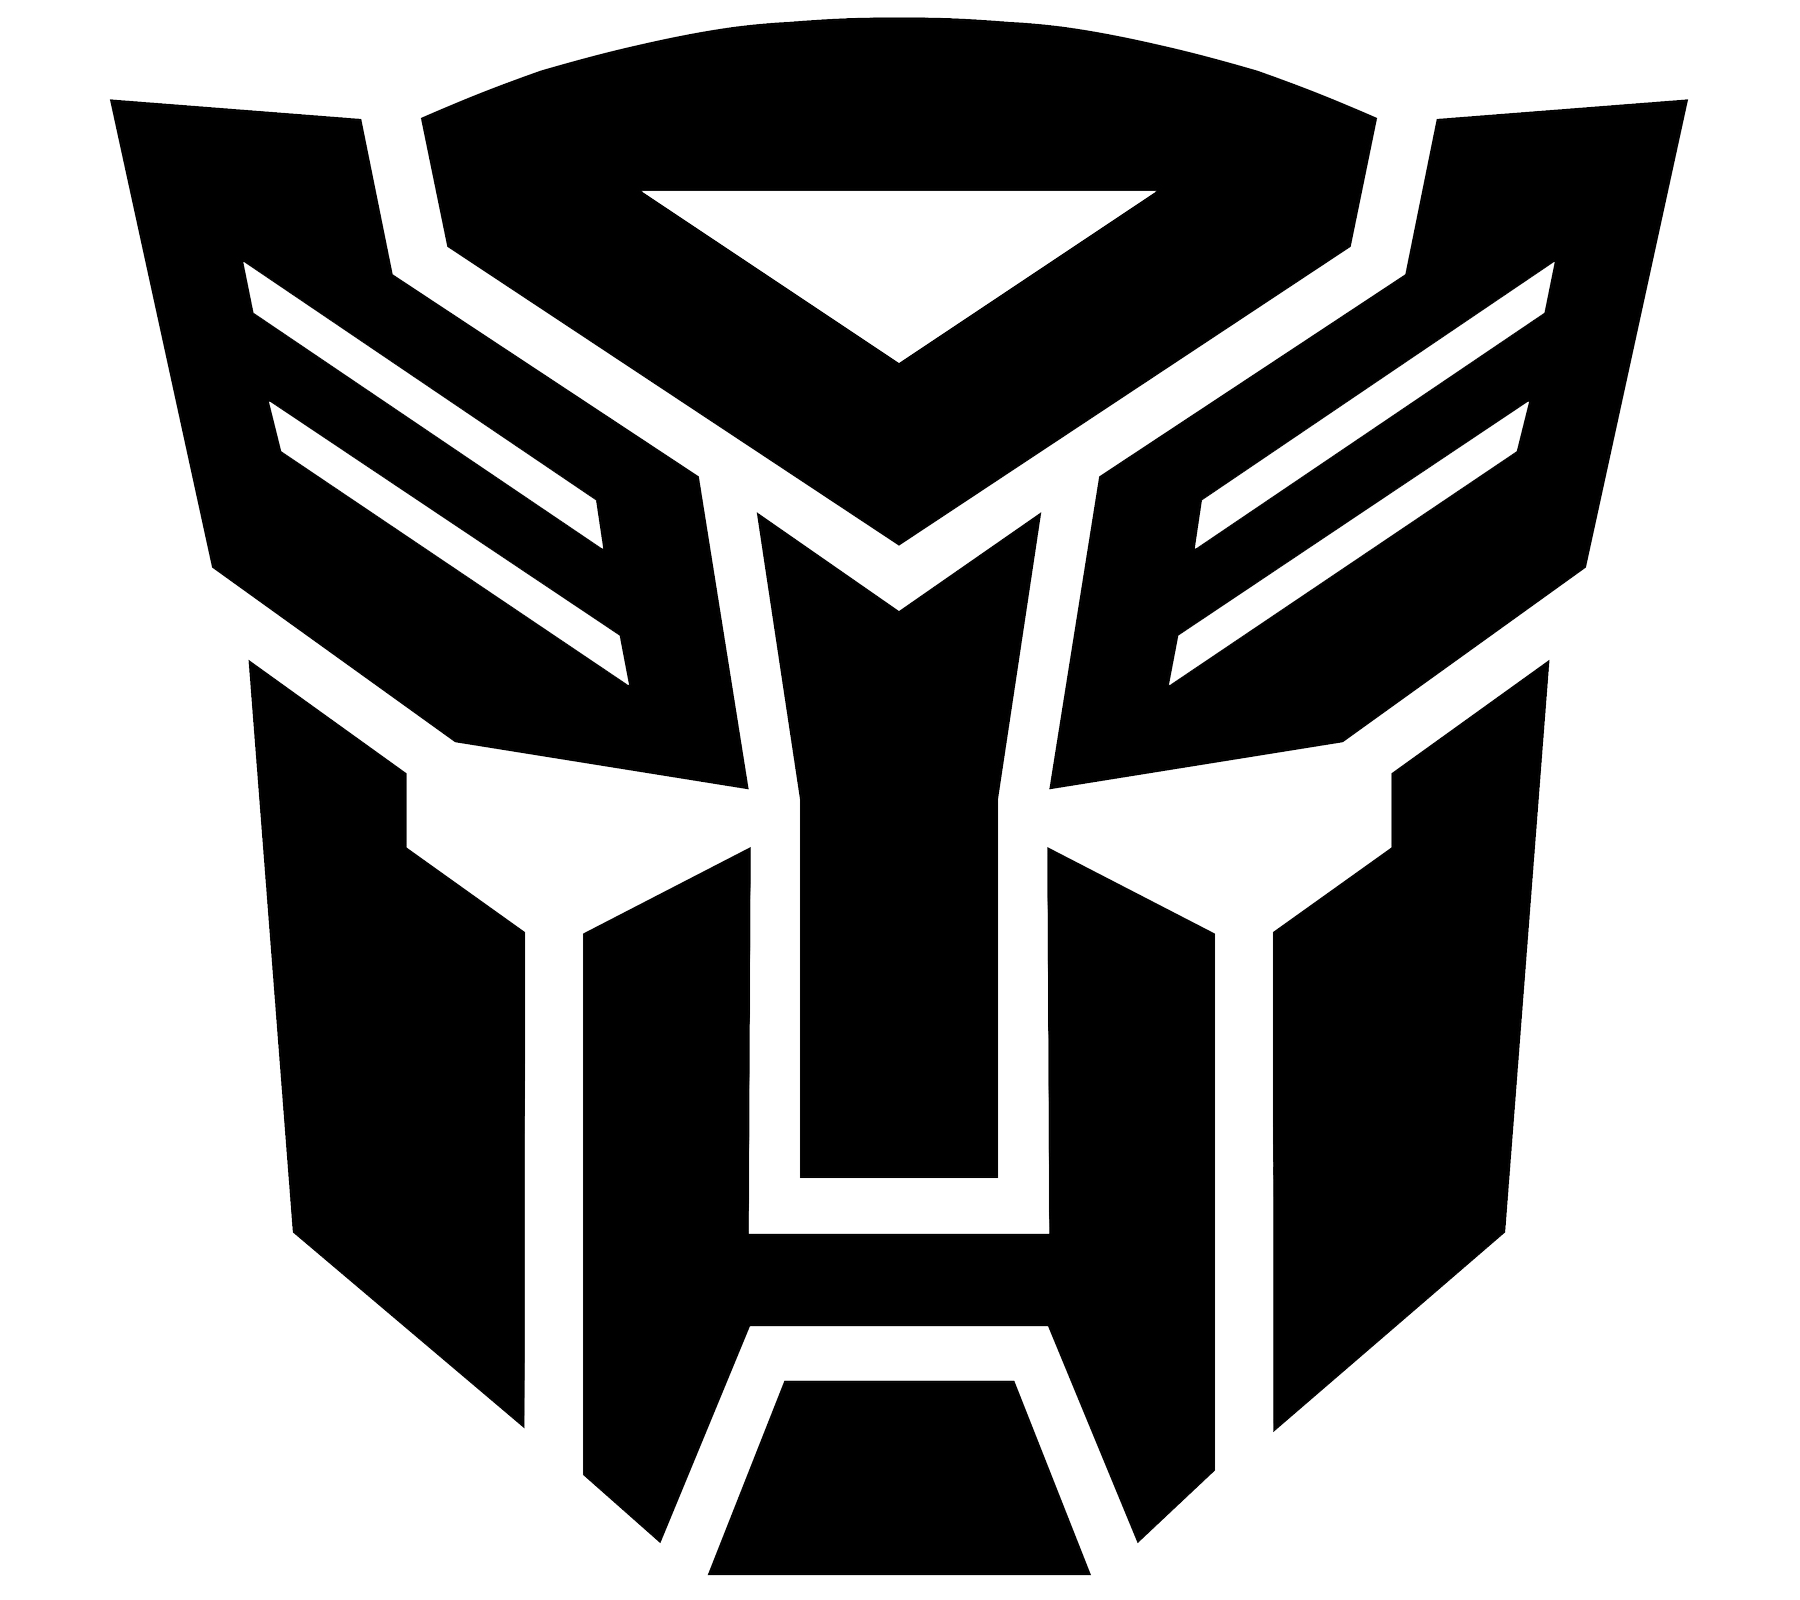 Transfromer Logo - Transformers Logo, symbol meaning, History and Evolution